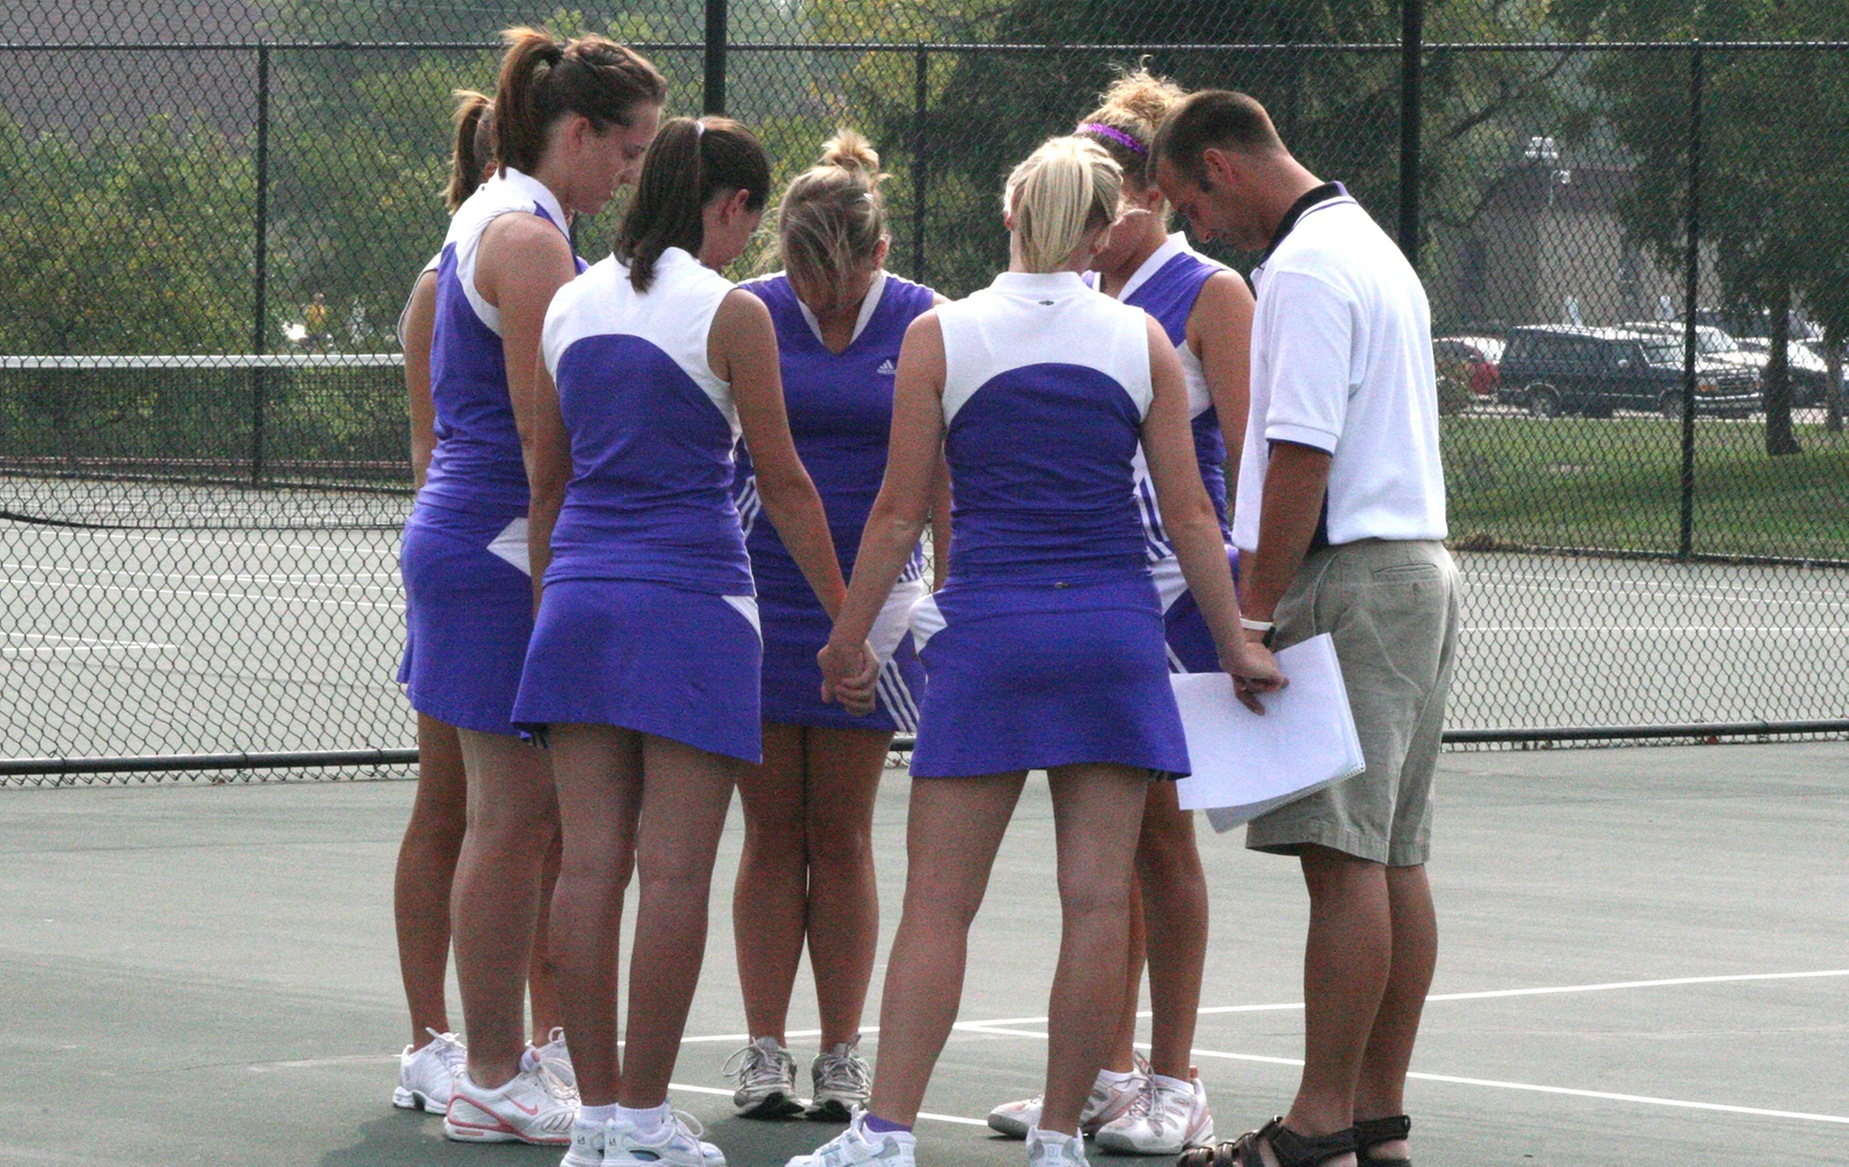 Defiance Drops Season-Opening Tri-Match to Franklin and MSJ